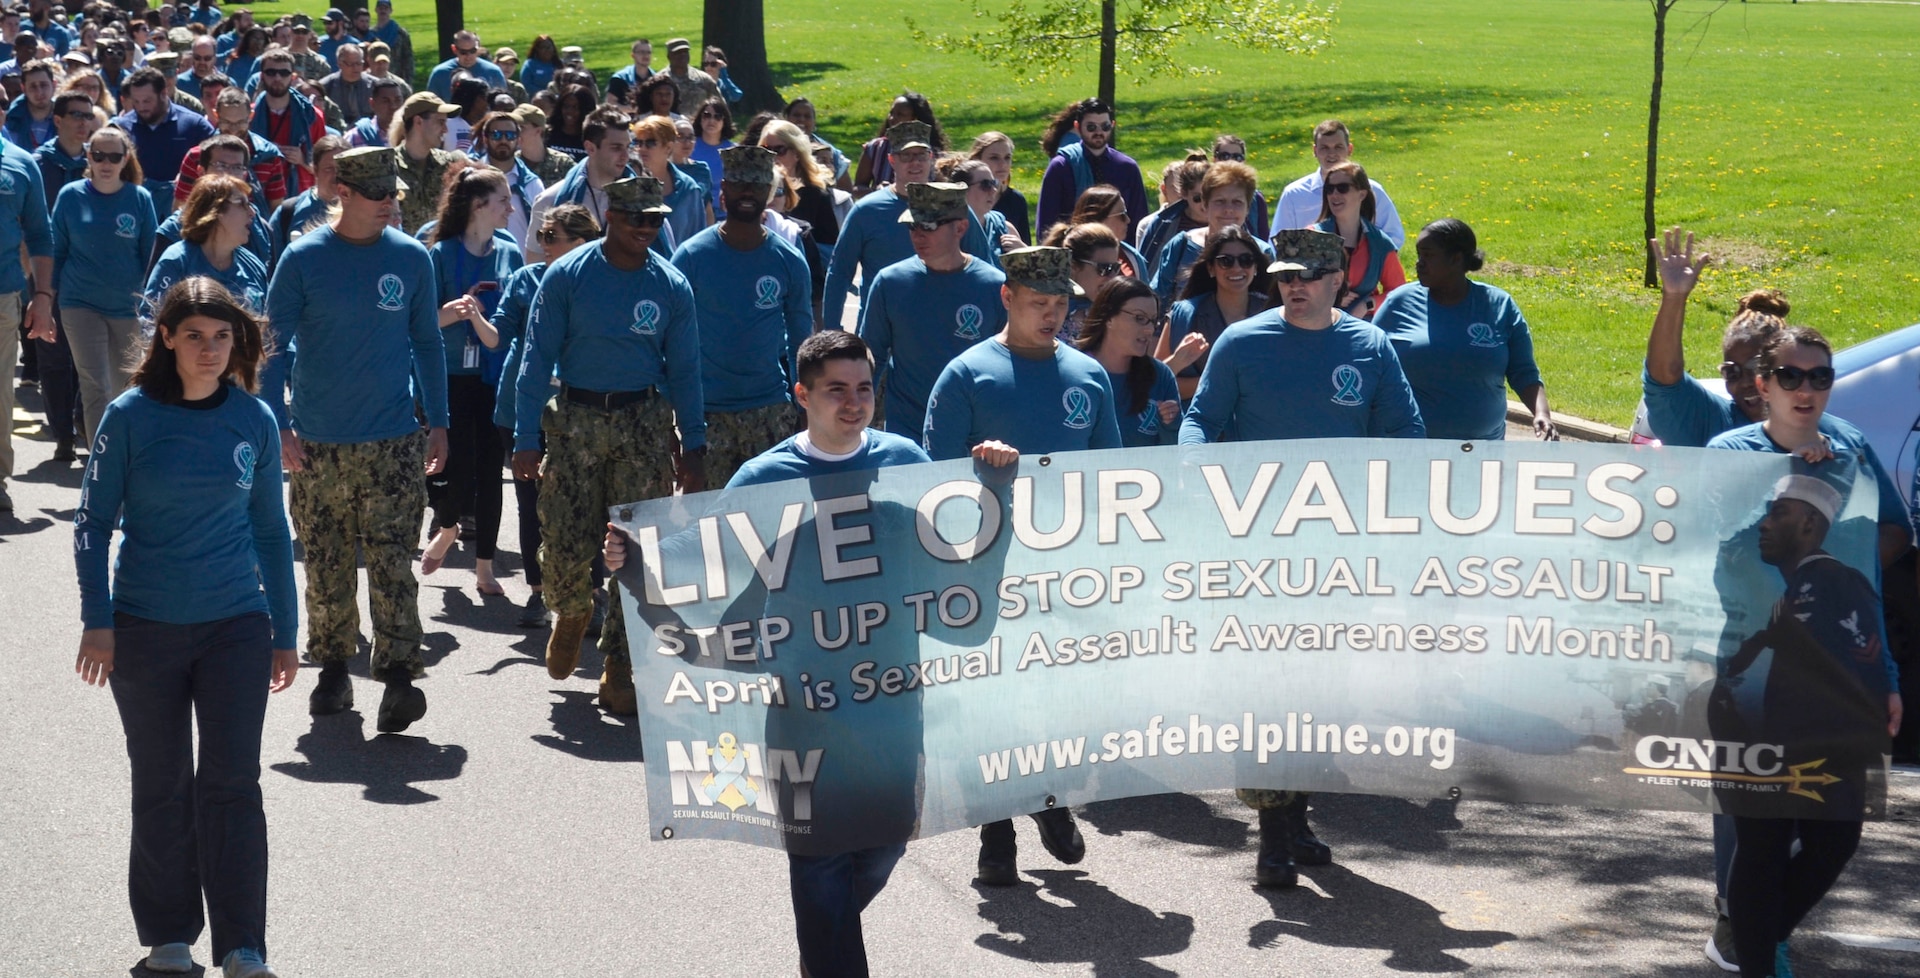 Supporters of Sexual Assault Awareness and Prevention Month from NSA Philadelphia and its tenant commands, including DLA Troop Support, create a "sea of teal" on their annual awareness walk across the installation April 23, 2019 in Philadelphia.